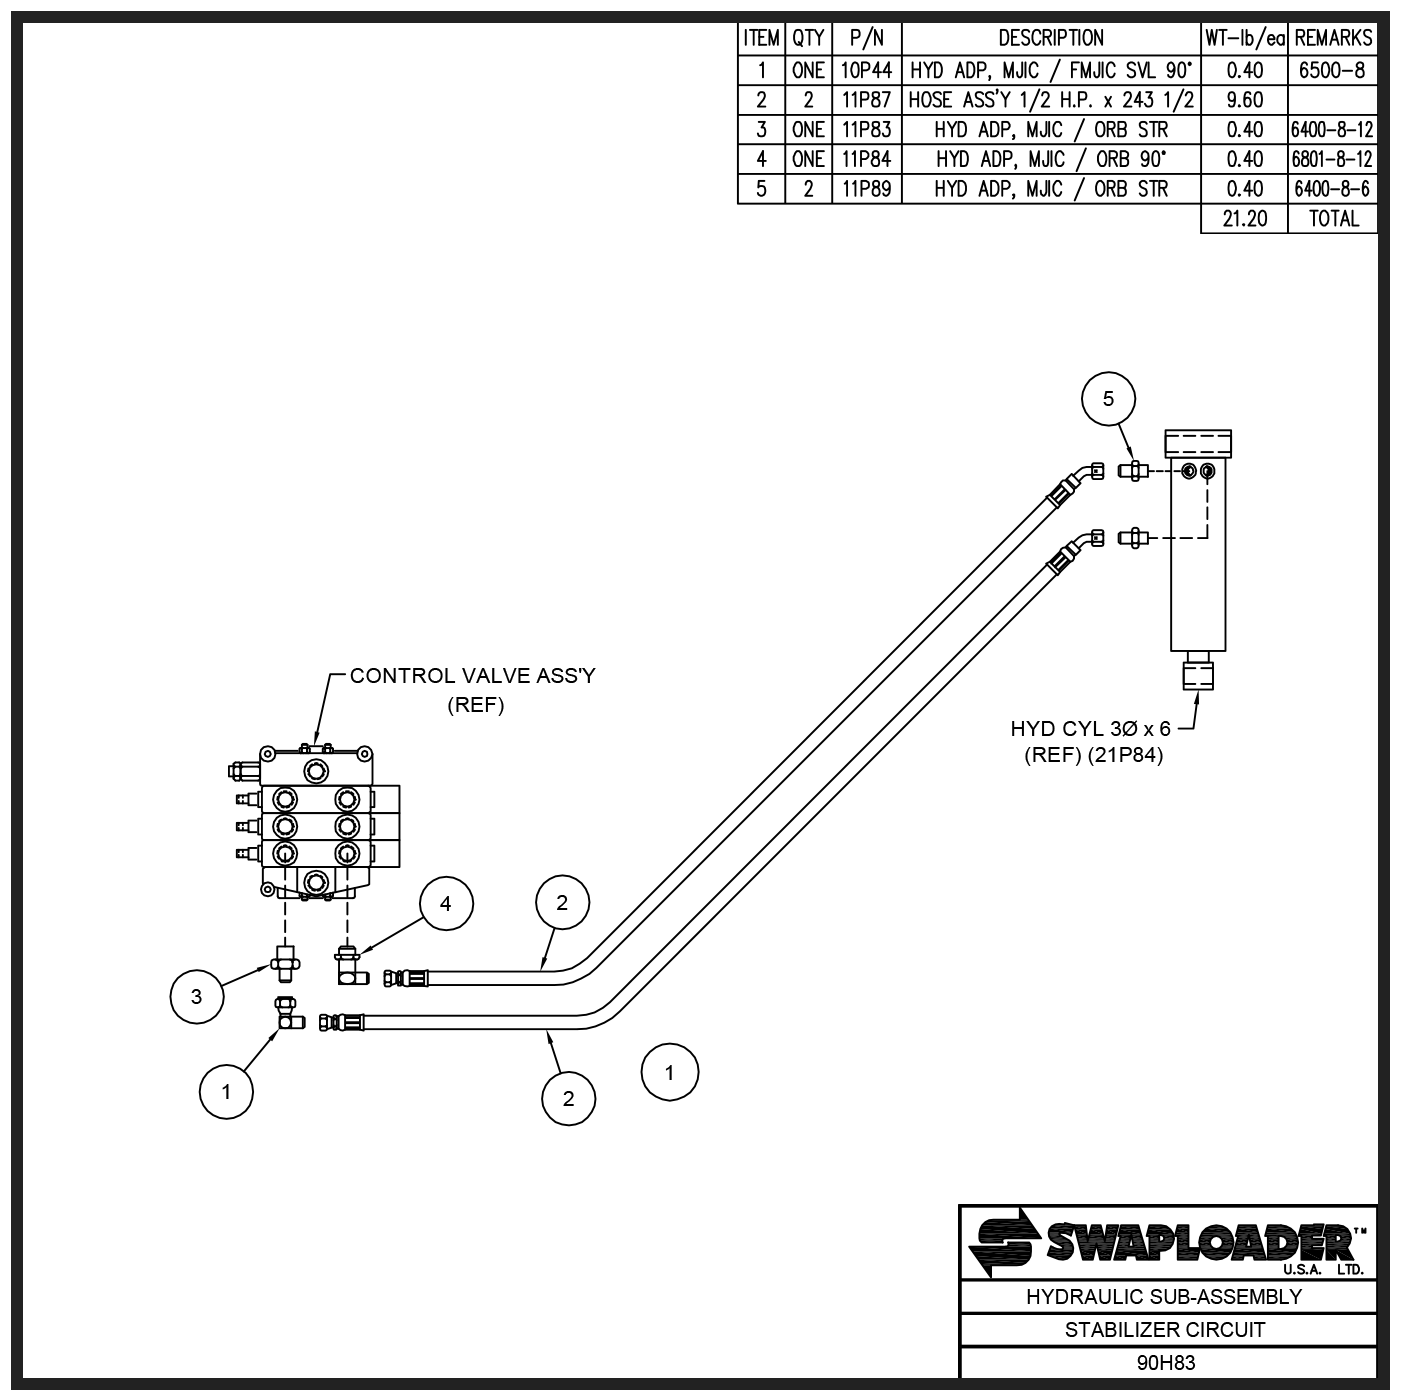 Swaploader 90H83 Hydraulic Sub-Assembly Stabilizer Circuit Diagram